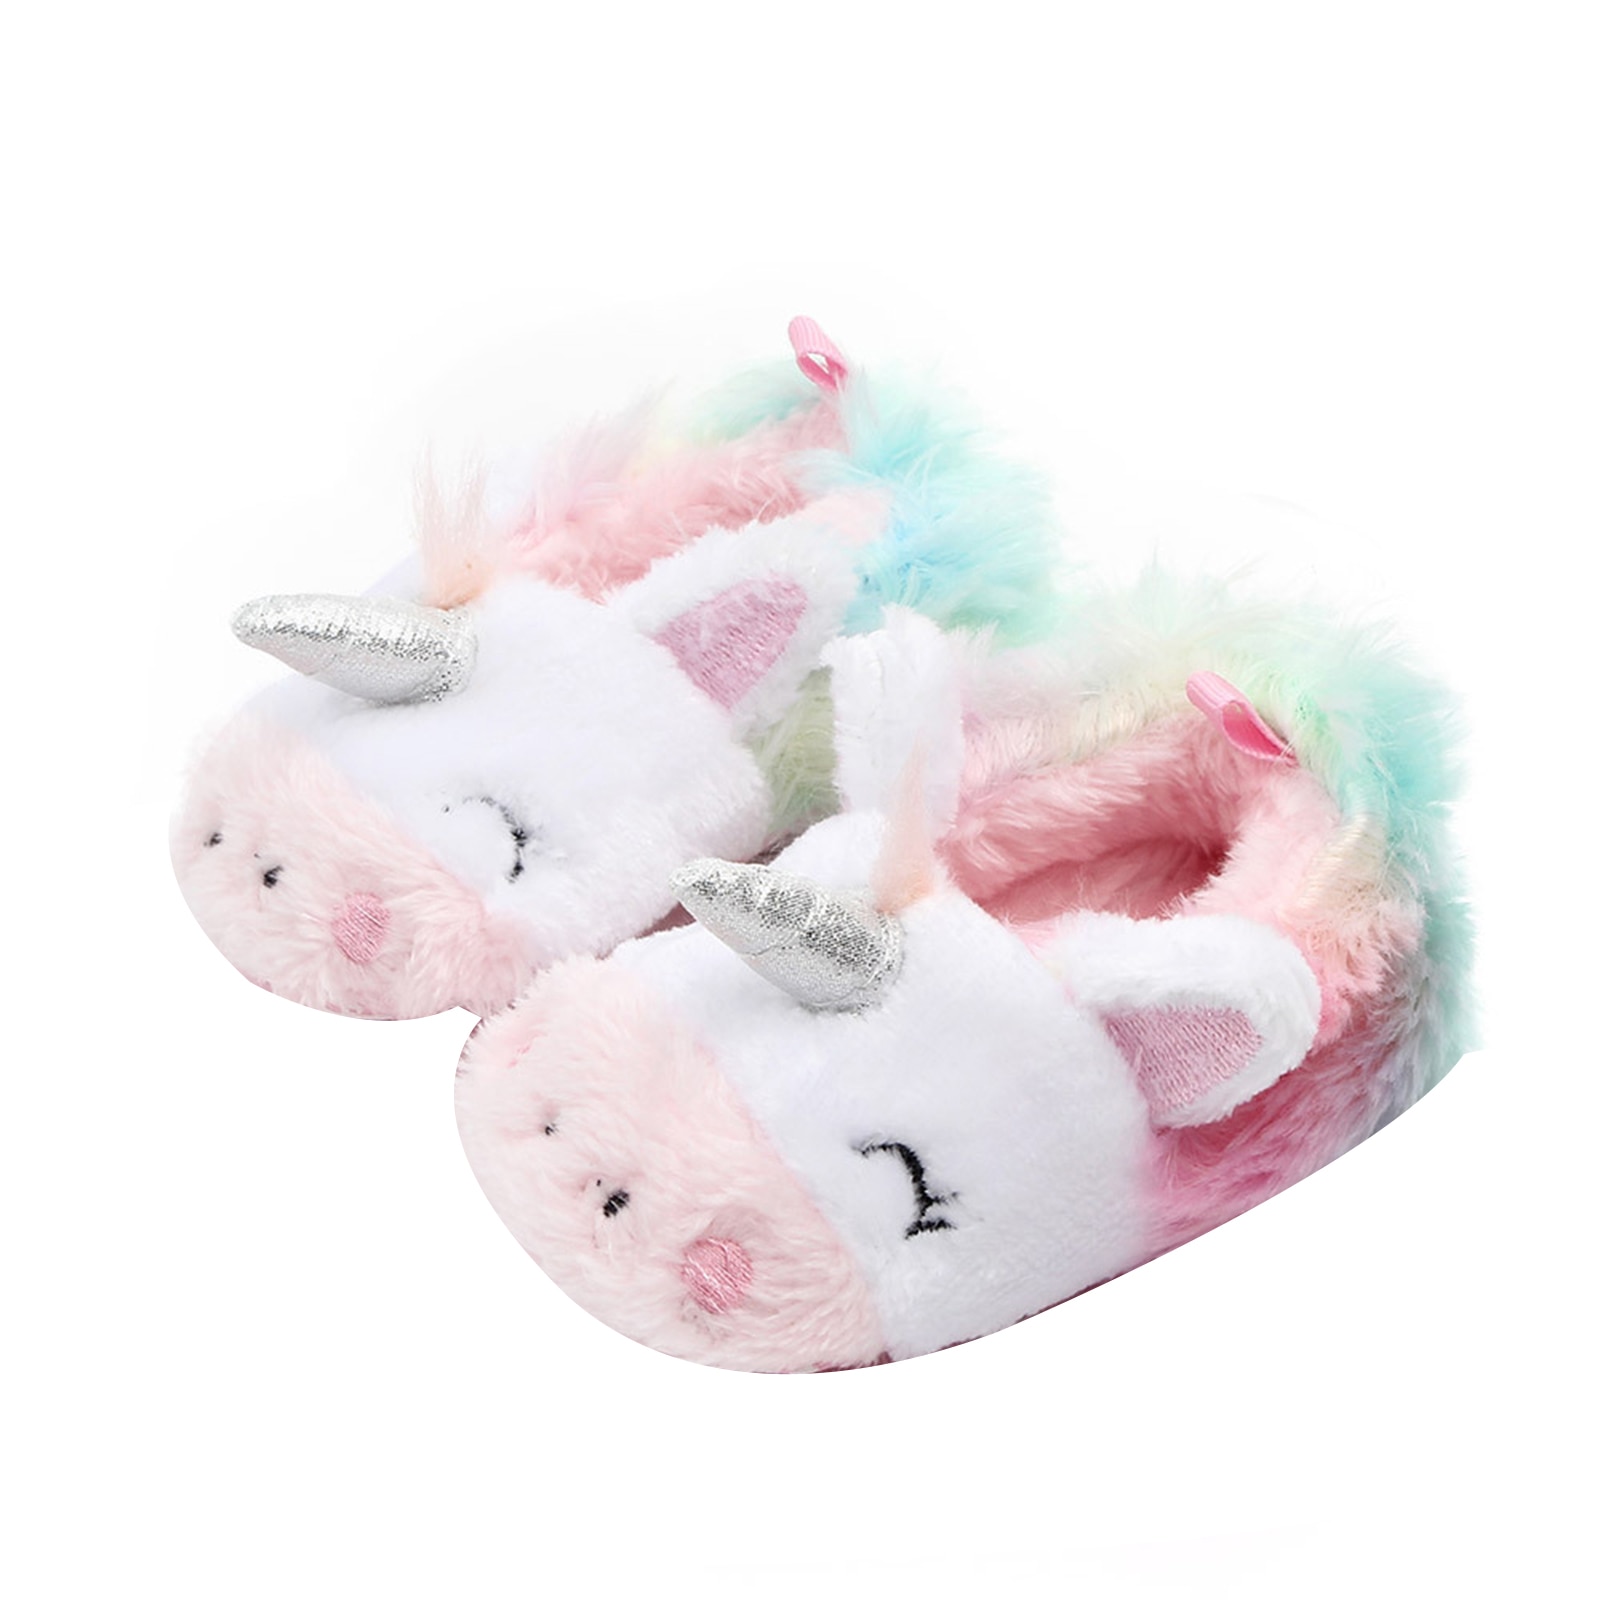 shop with crypto buy Toddler Baby Shoes Newborn Autumn Winter Warm First Walkers Children Slippers Fur Footwear Crib Shoes Infant Kids Prewalkers pay with bitcoin